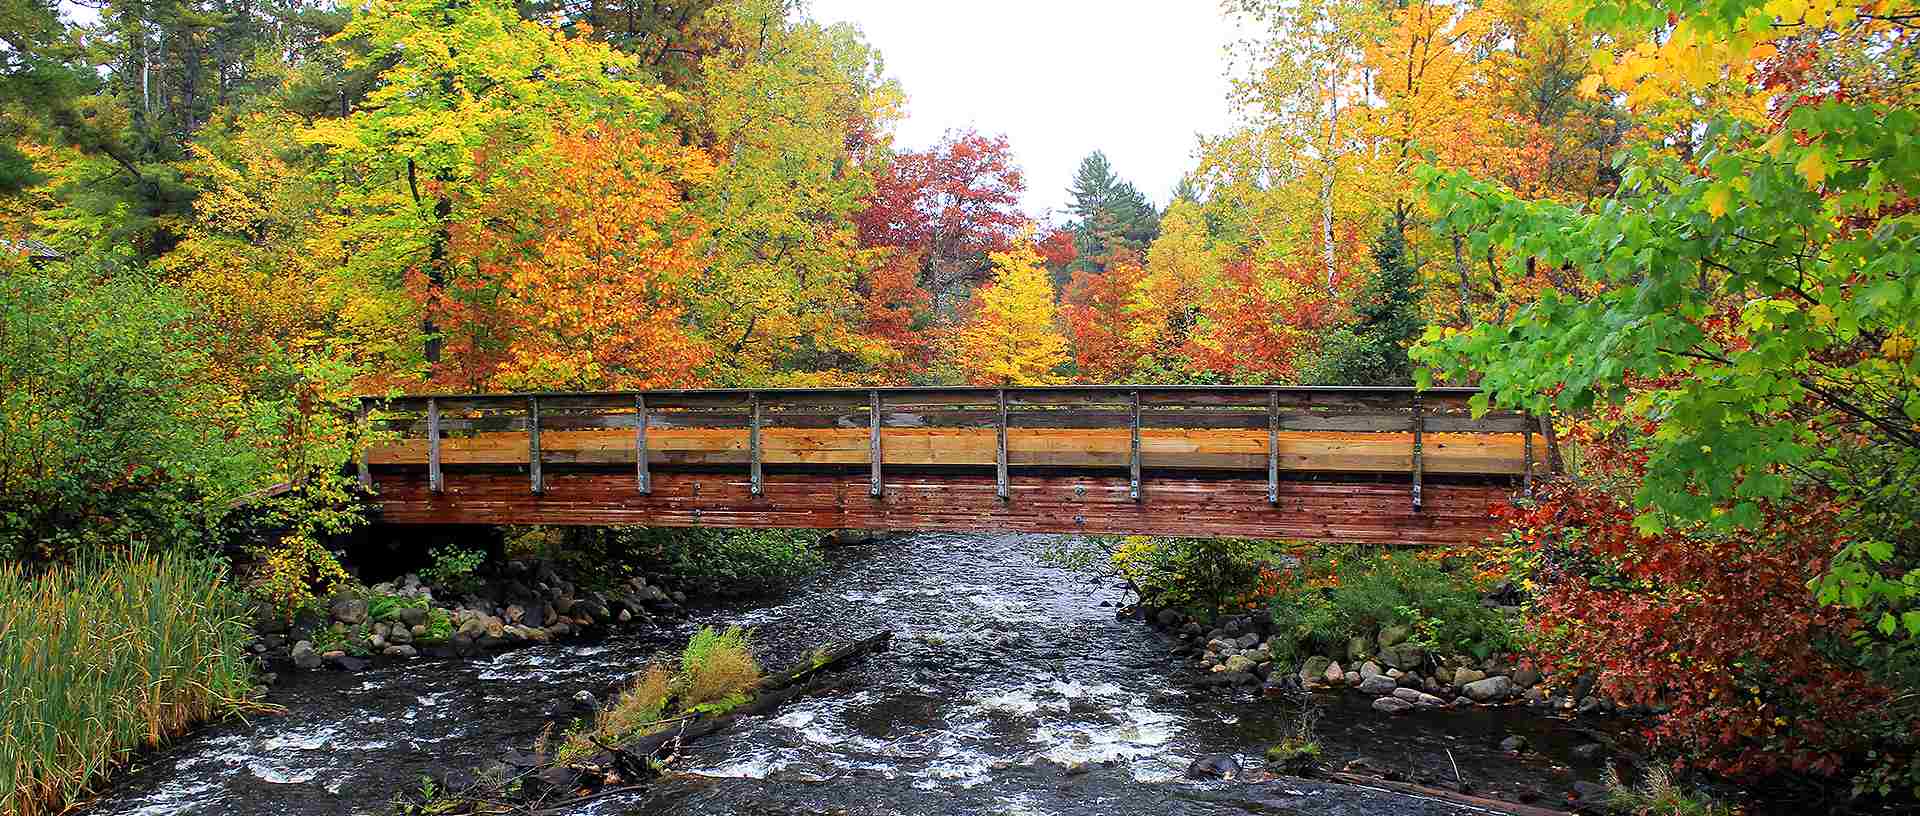 Bridge over a creek surrounded by fall trees